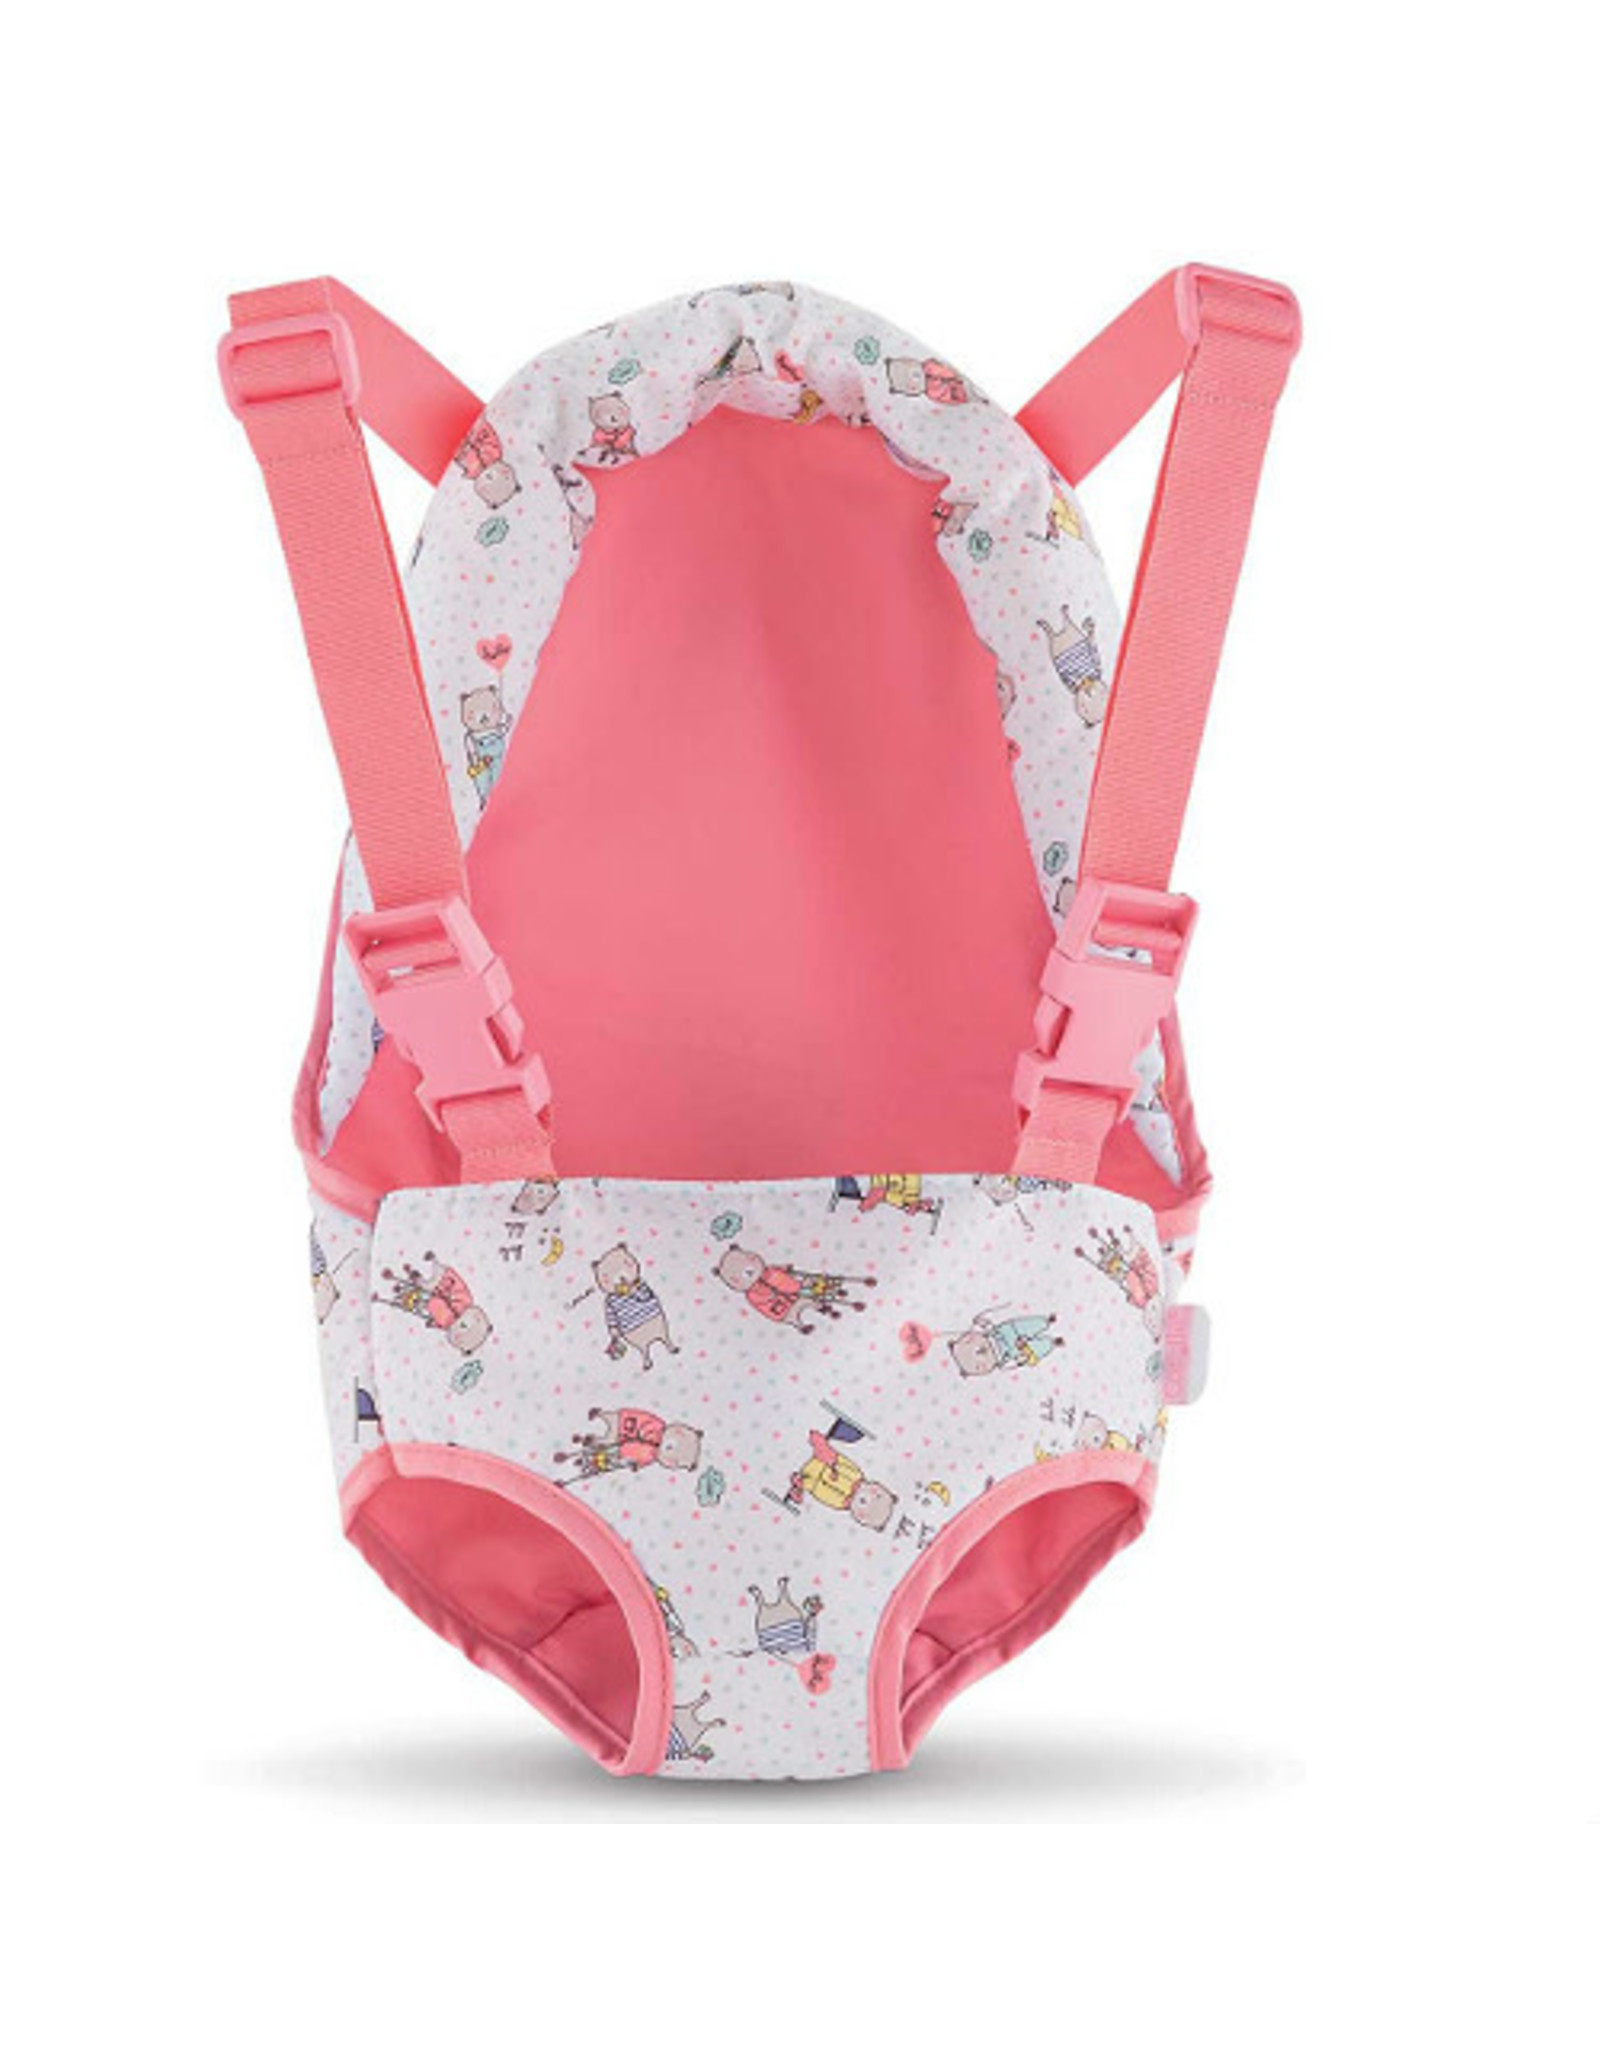 Corolle BB14" Baby Doll Sling (fabric/colors may vary)